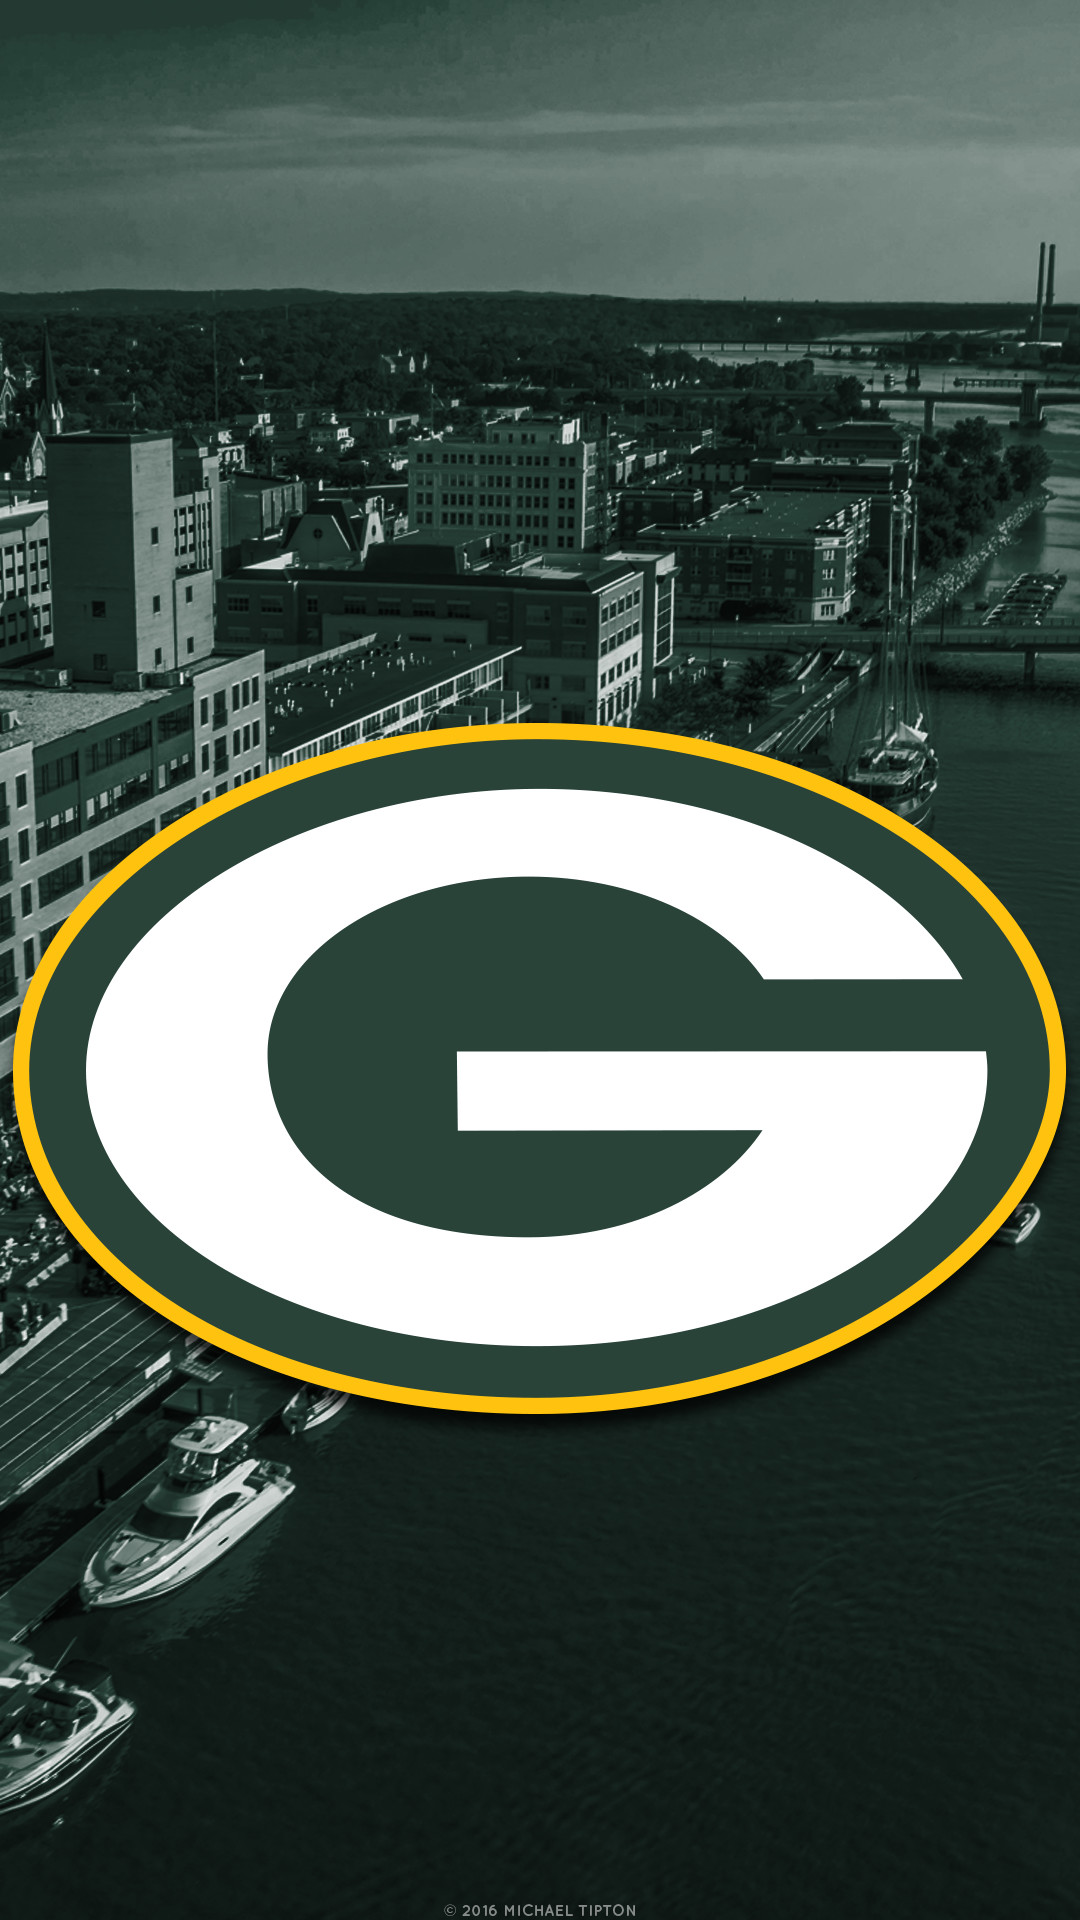 1080x1920 The Highest Quality Green Bay Packers Football Schedule Wallpapers and Logo  Backgrounds for iPhone, Andriod, Galaxy, and Desktop PC.